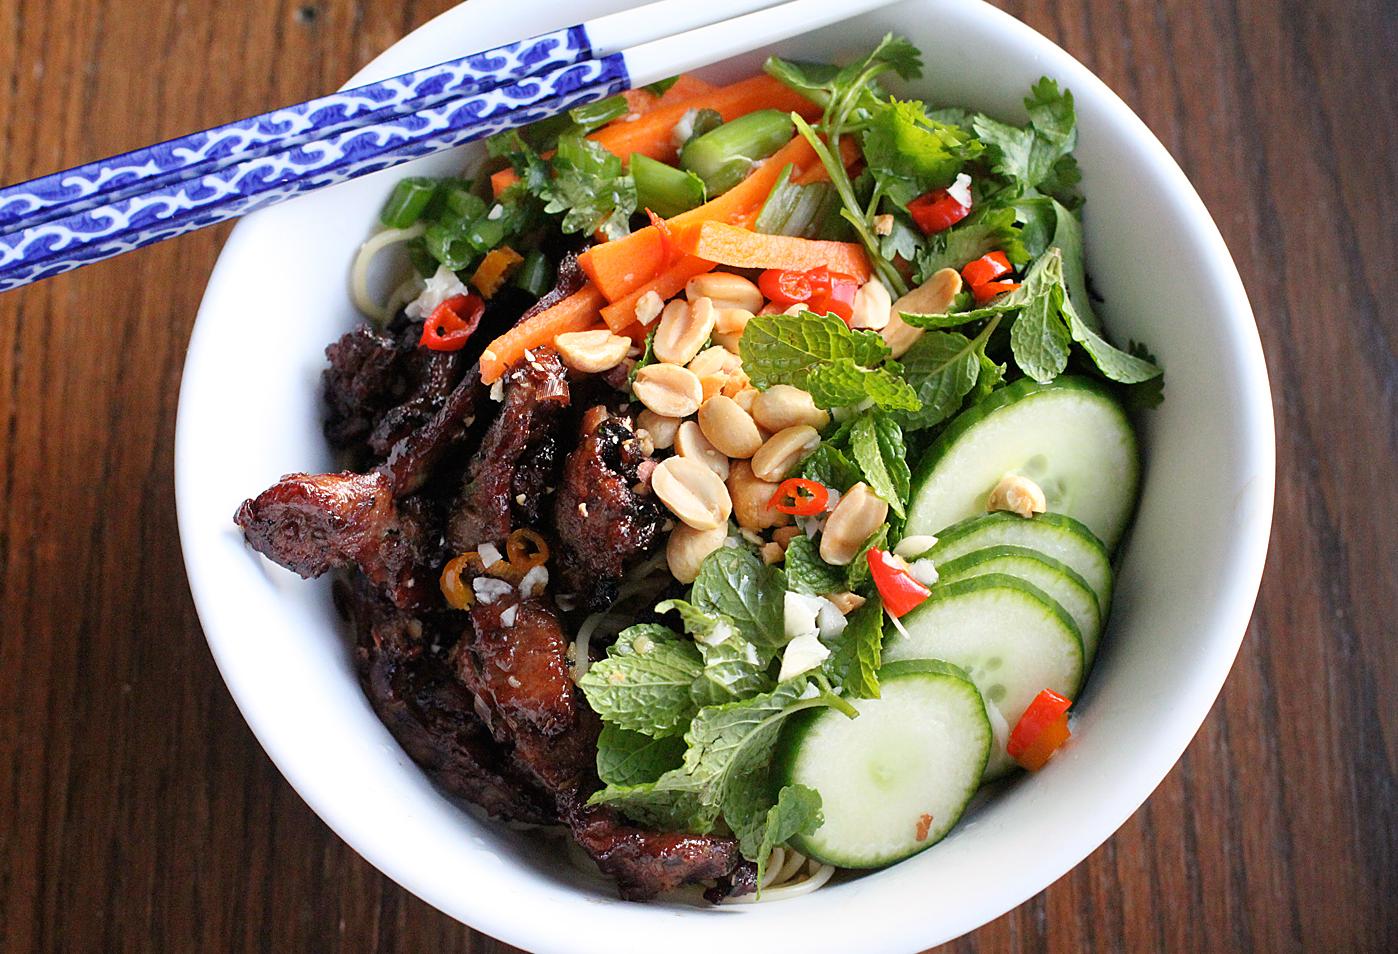  One bite of this salad and you'll be transported to the streets of Vietnam